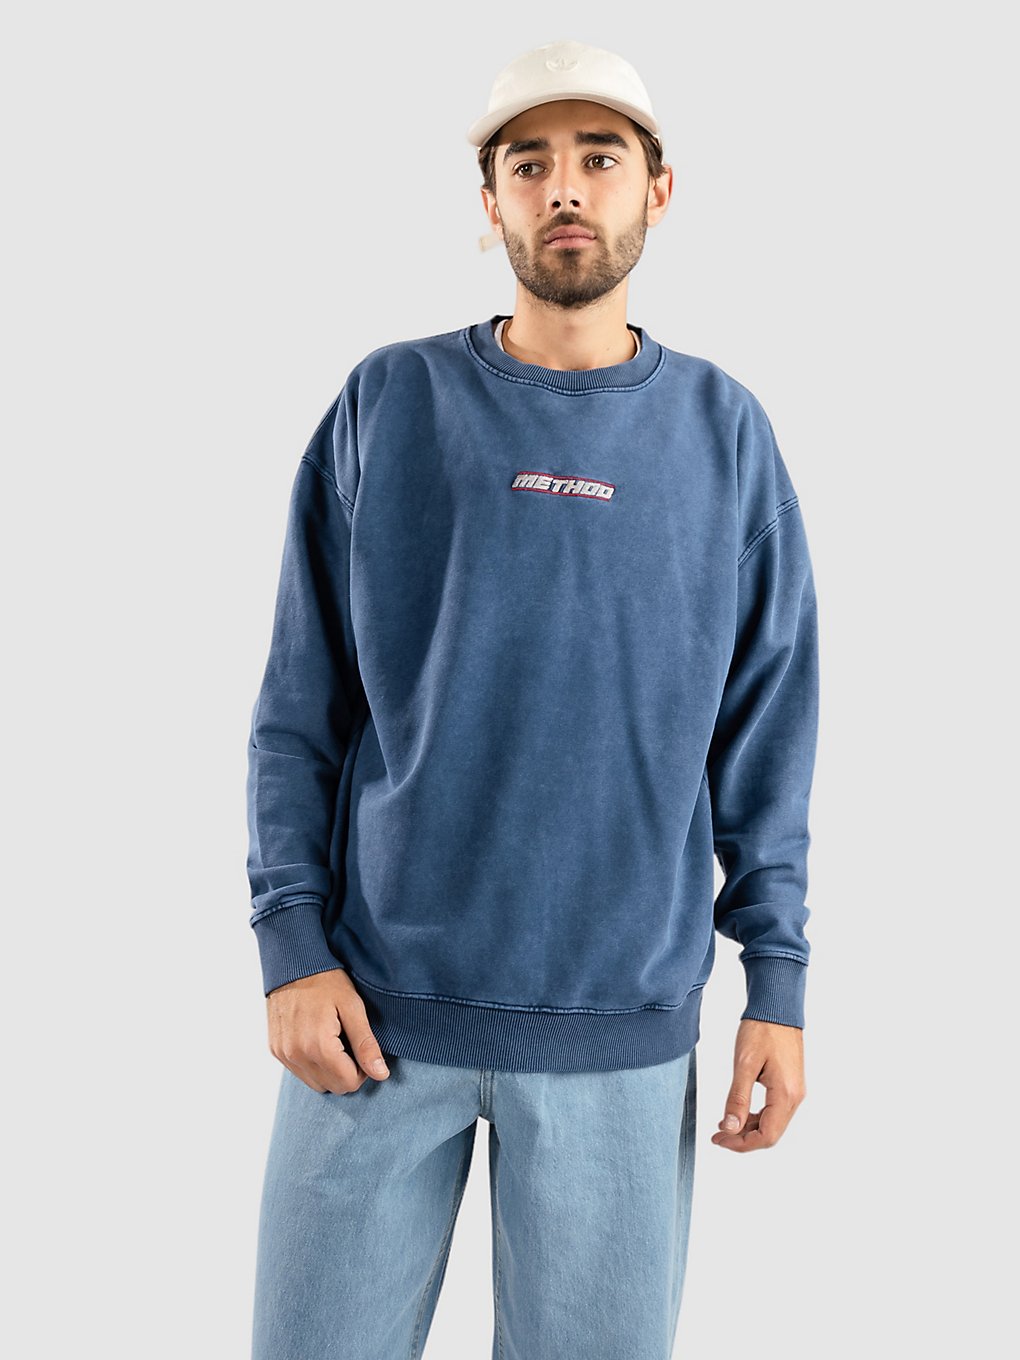 Method Mag Hold Fast Crew Sweater washed navy kaufen